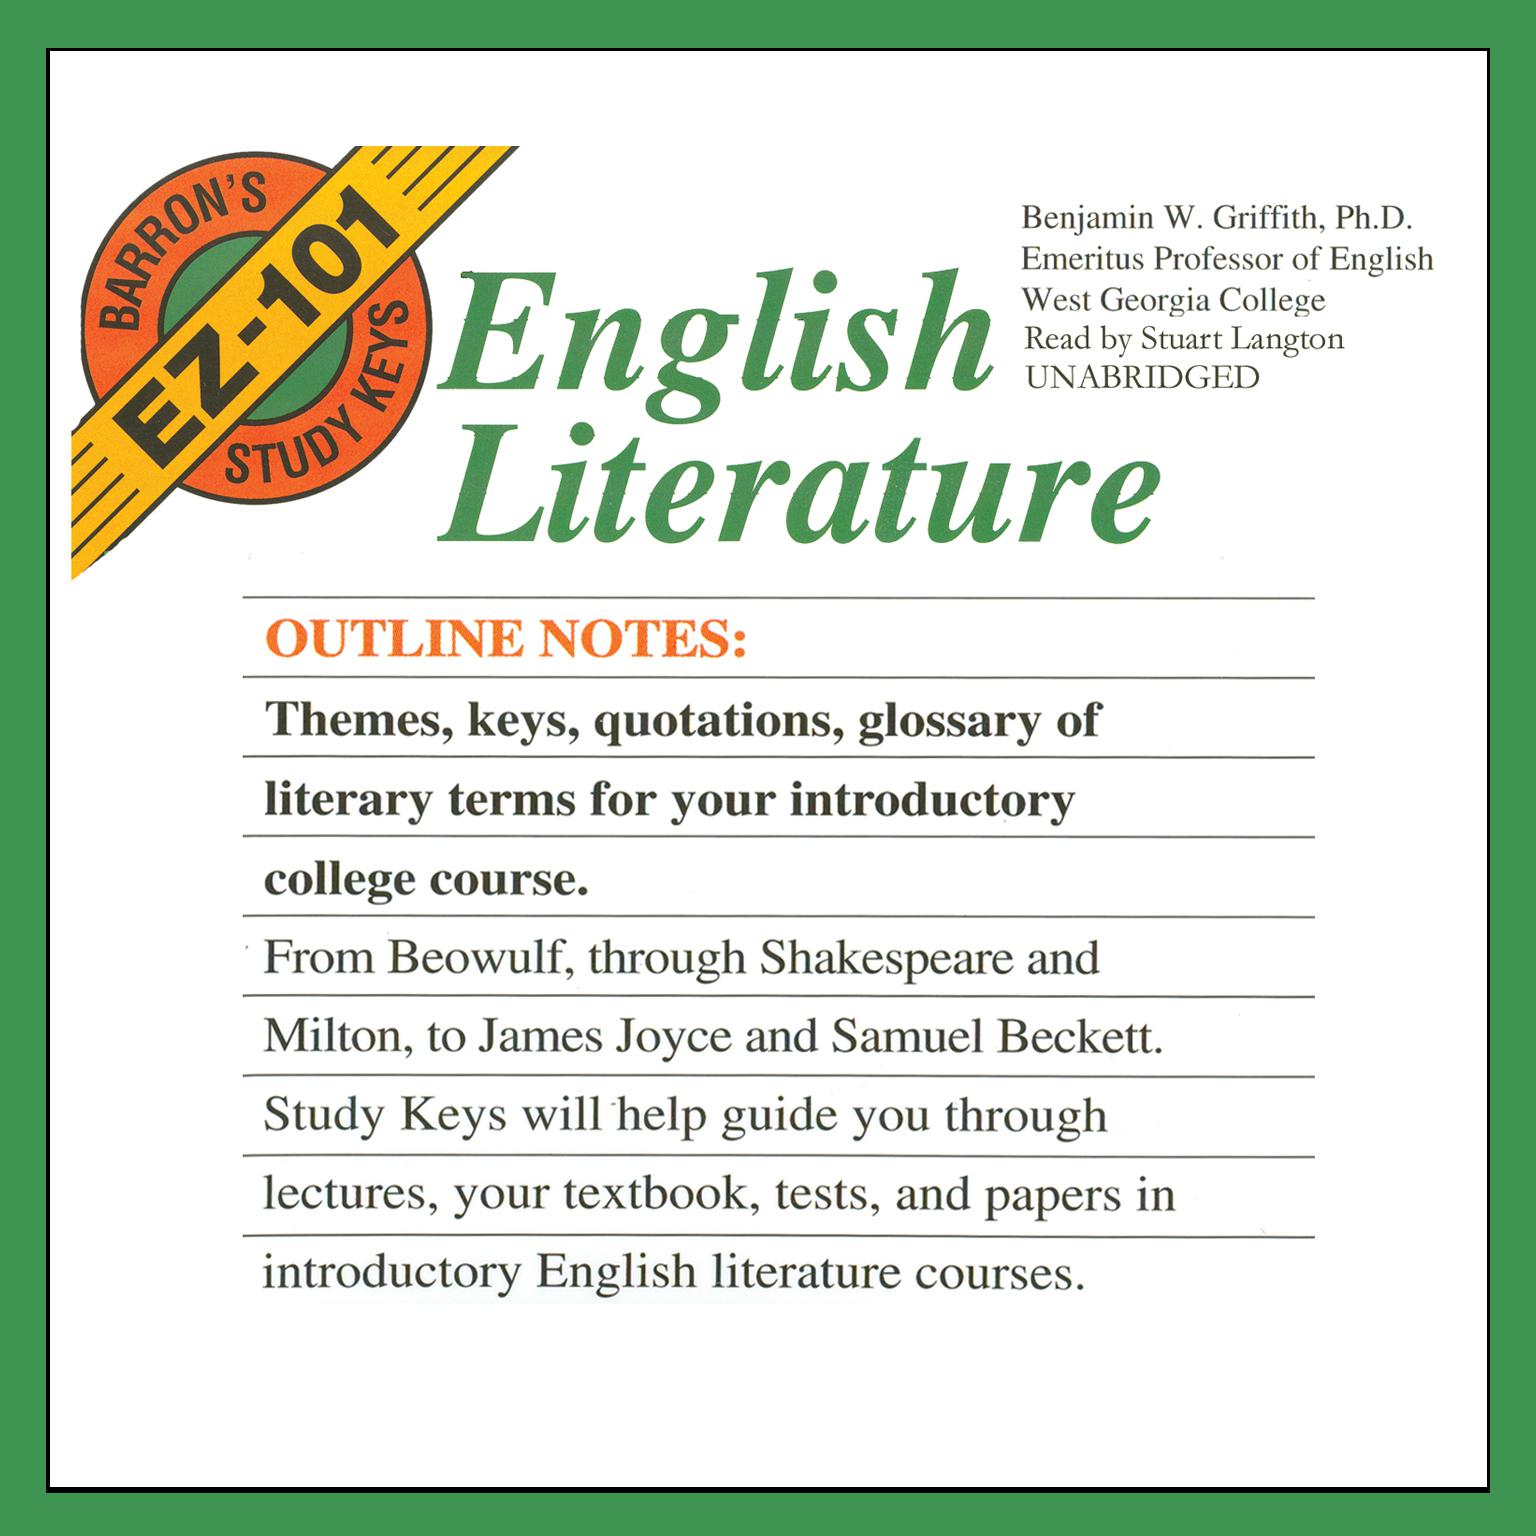 English Literature Audiobook, by Benjamin W. Griffith